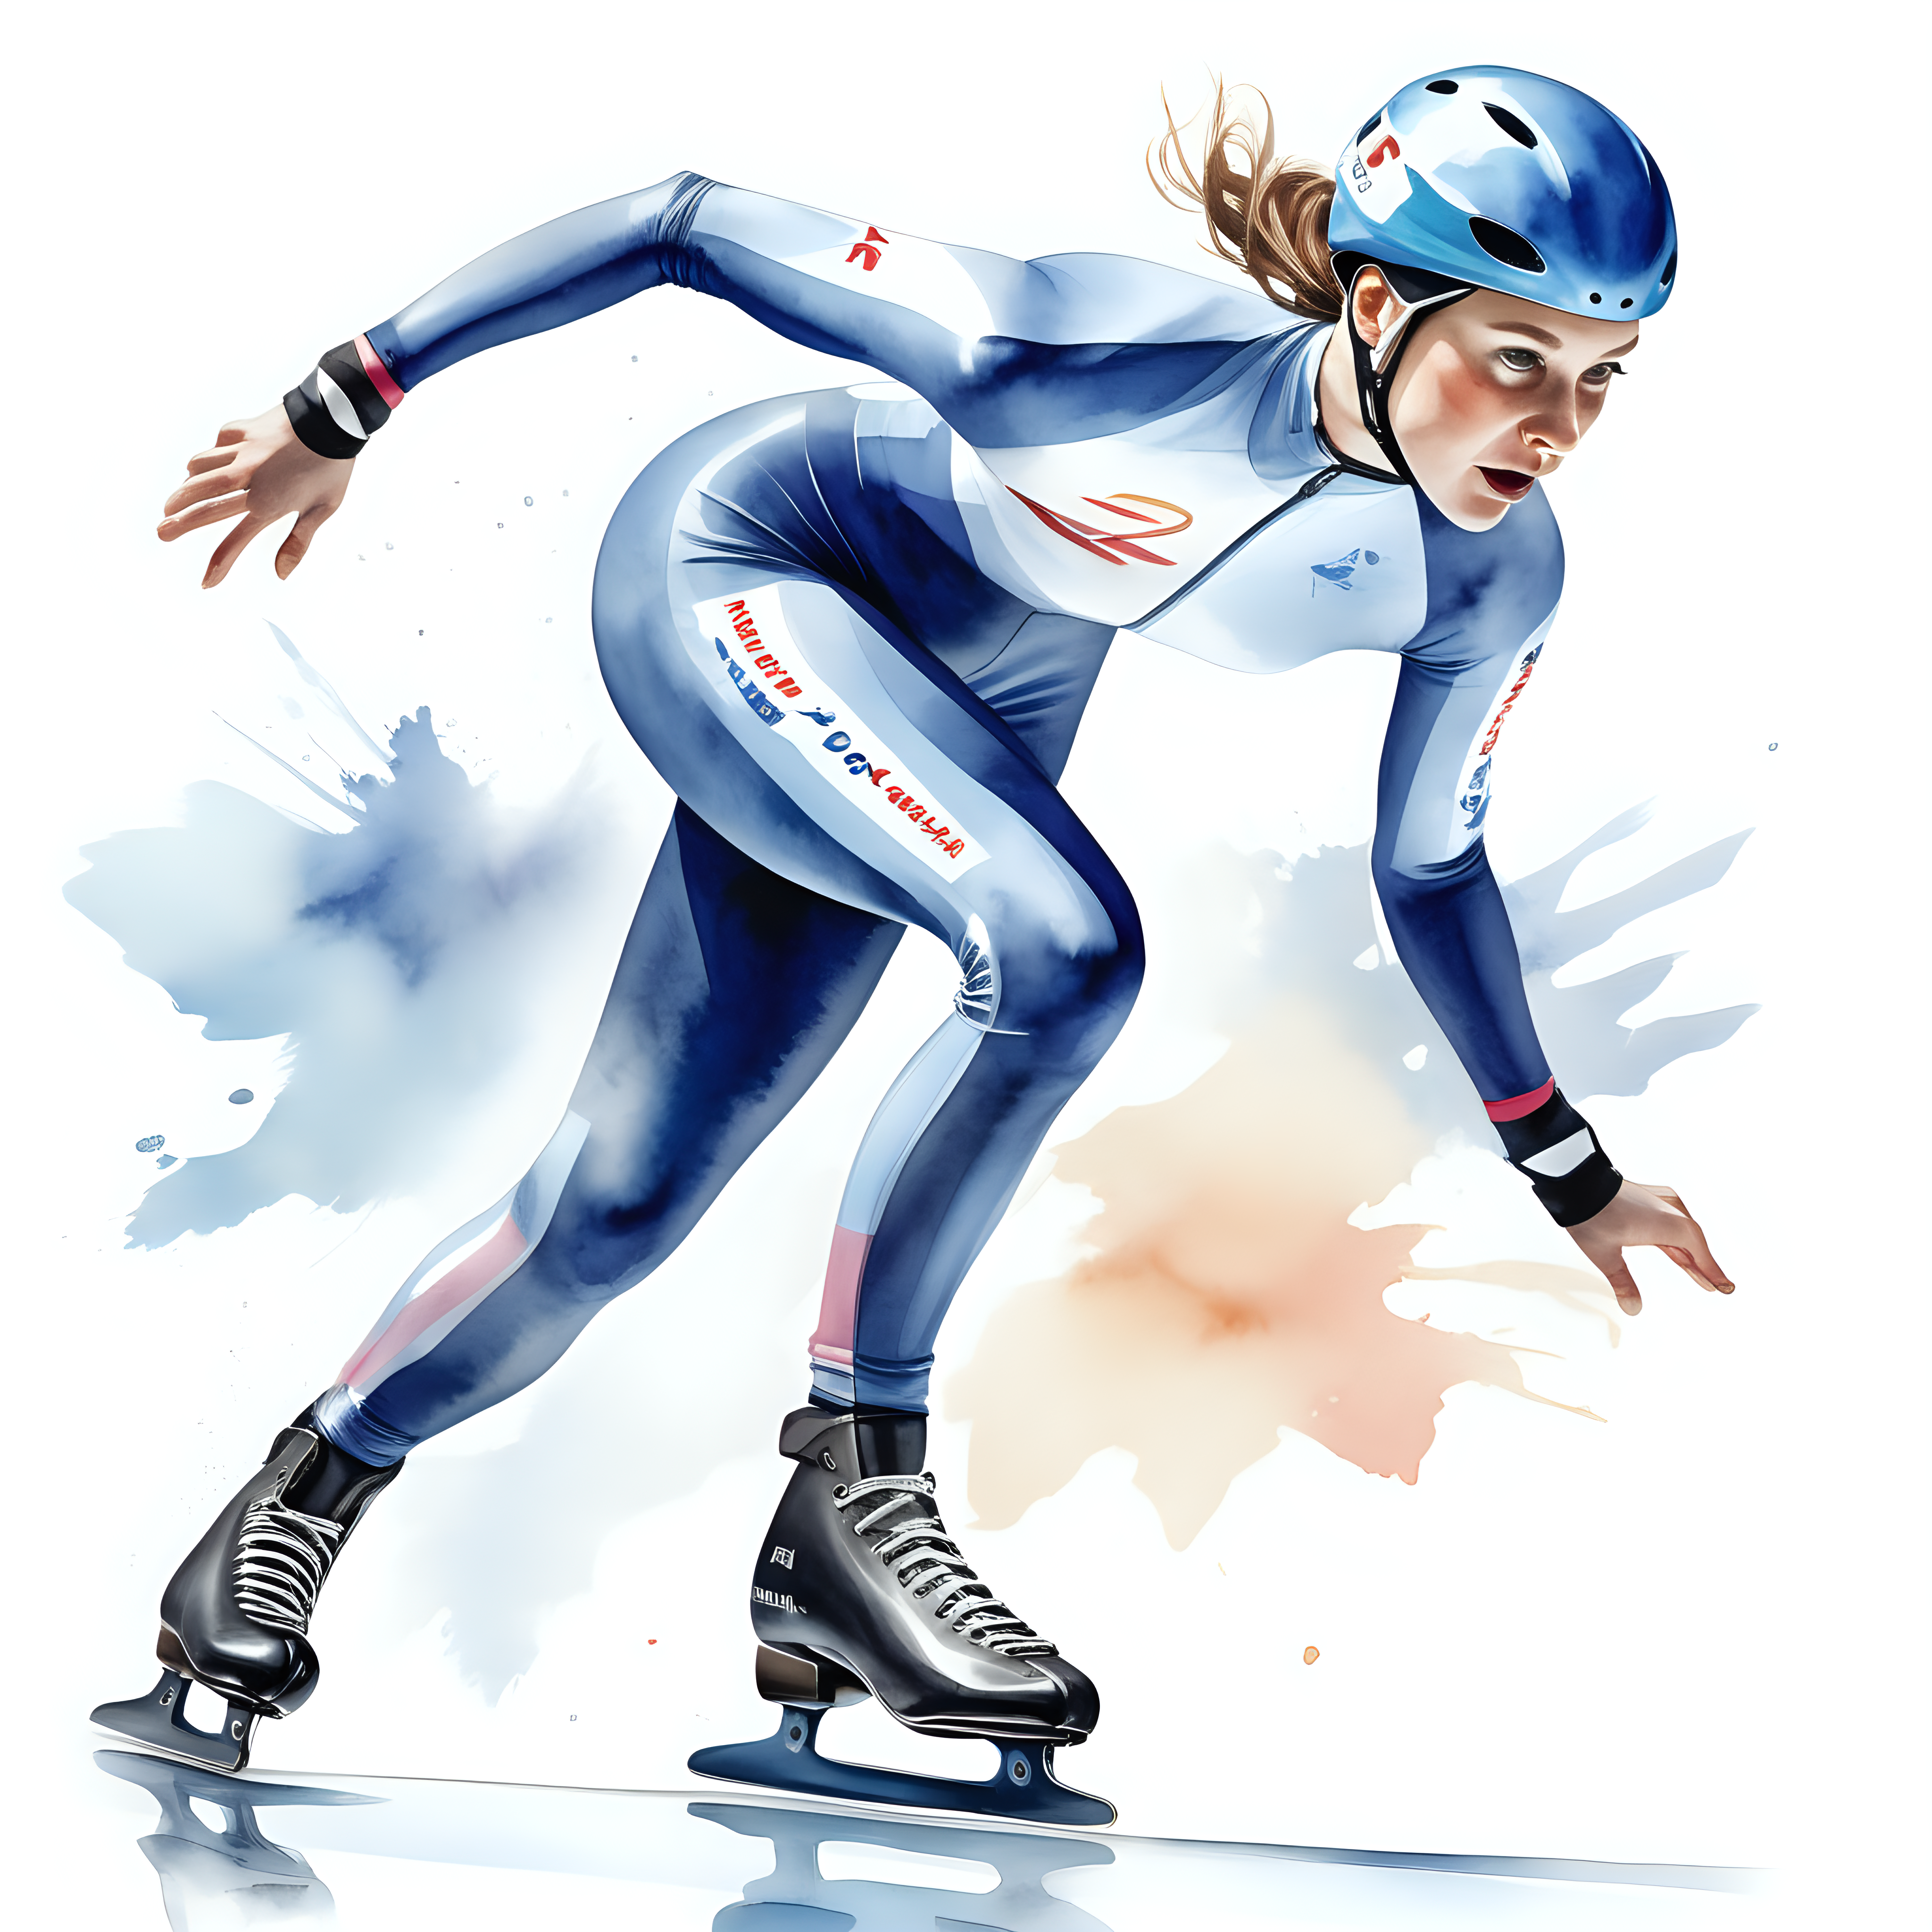 white background_create a realistic illustration _Speedskating_ _woman_famous speed skater_Martina Sáblíková _races in the sports hall_racing clothes and eis speed skating skates_motto_when you can't add more_watercolor style_real figure_
